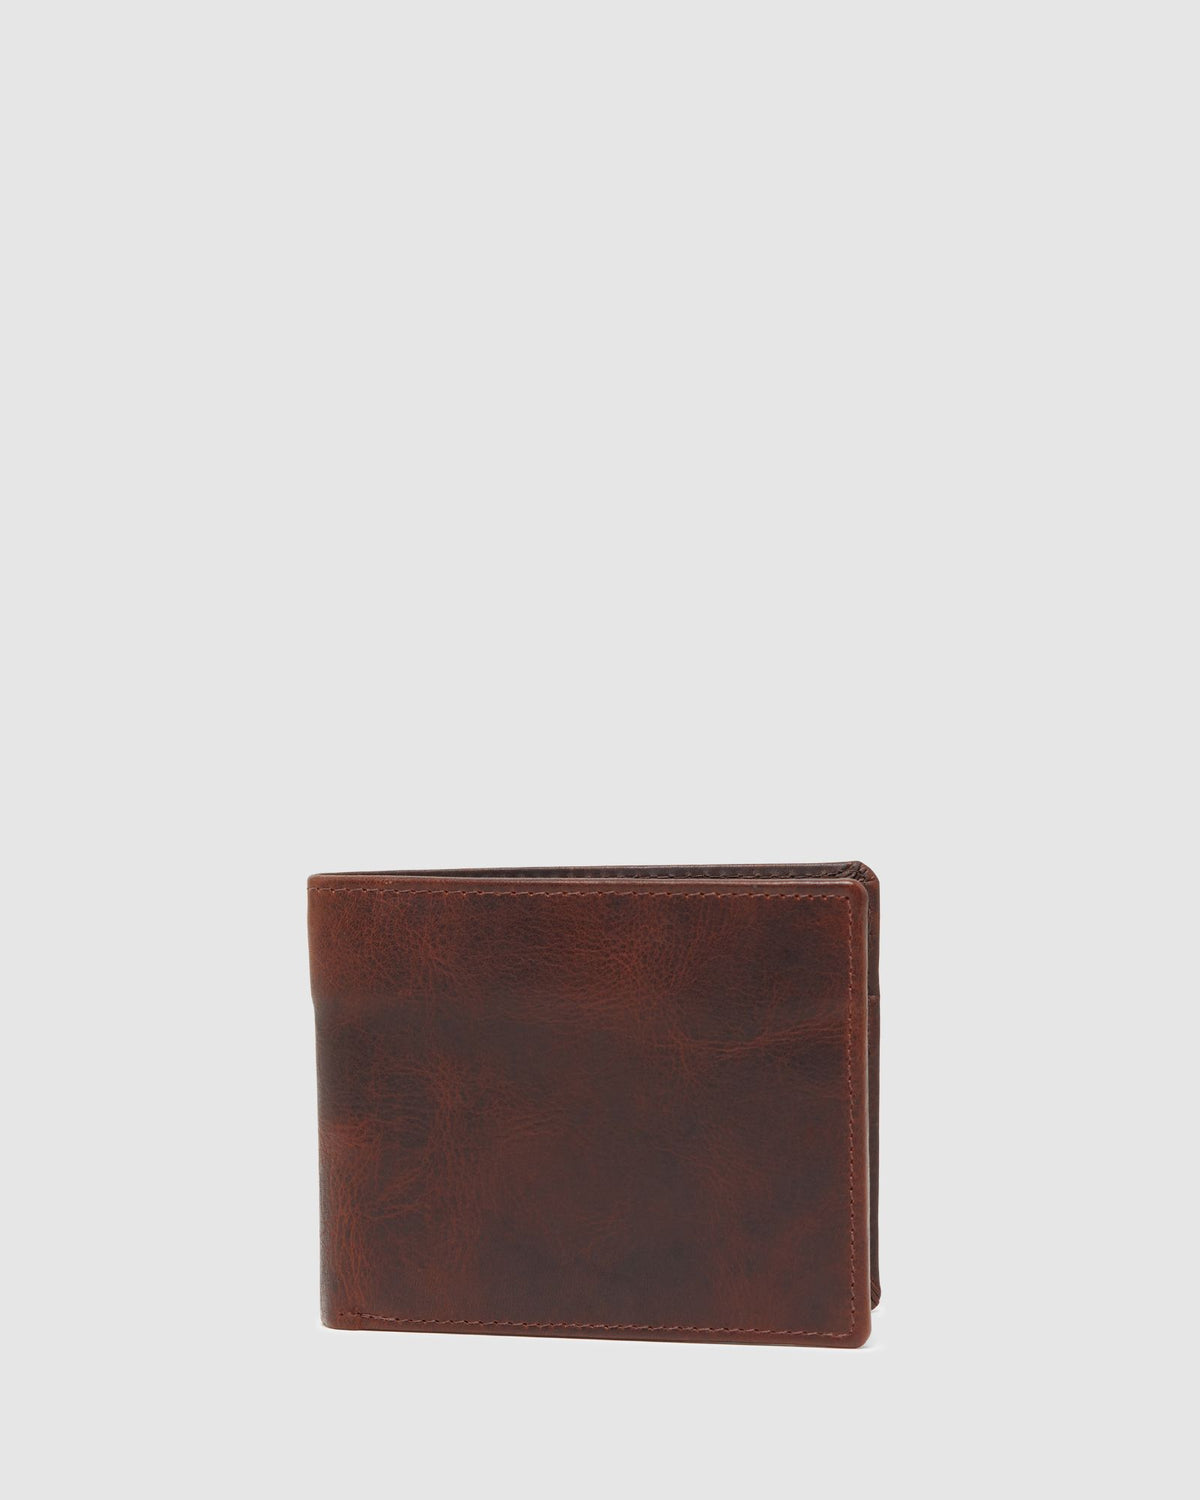 HOLBROOK LEATHER WALLET MENS ACCESSORIES